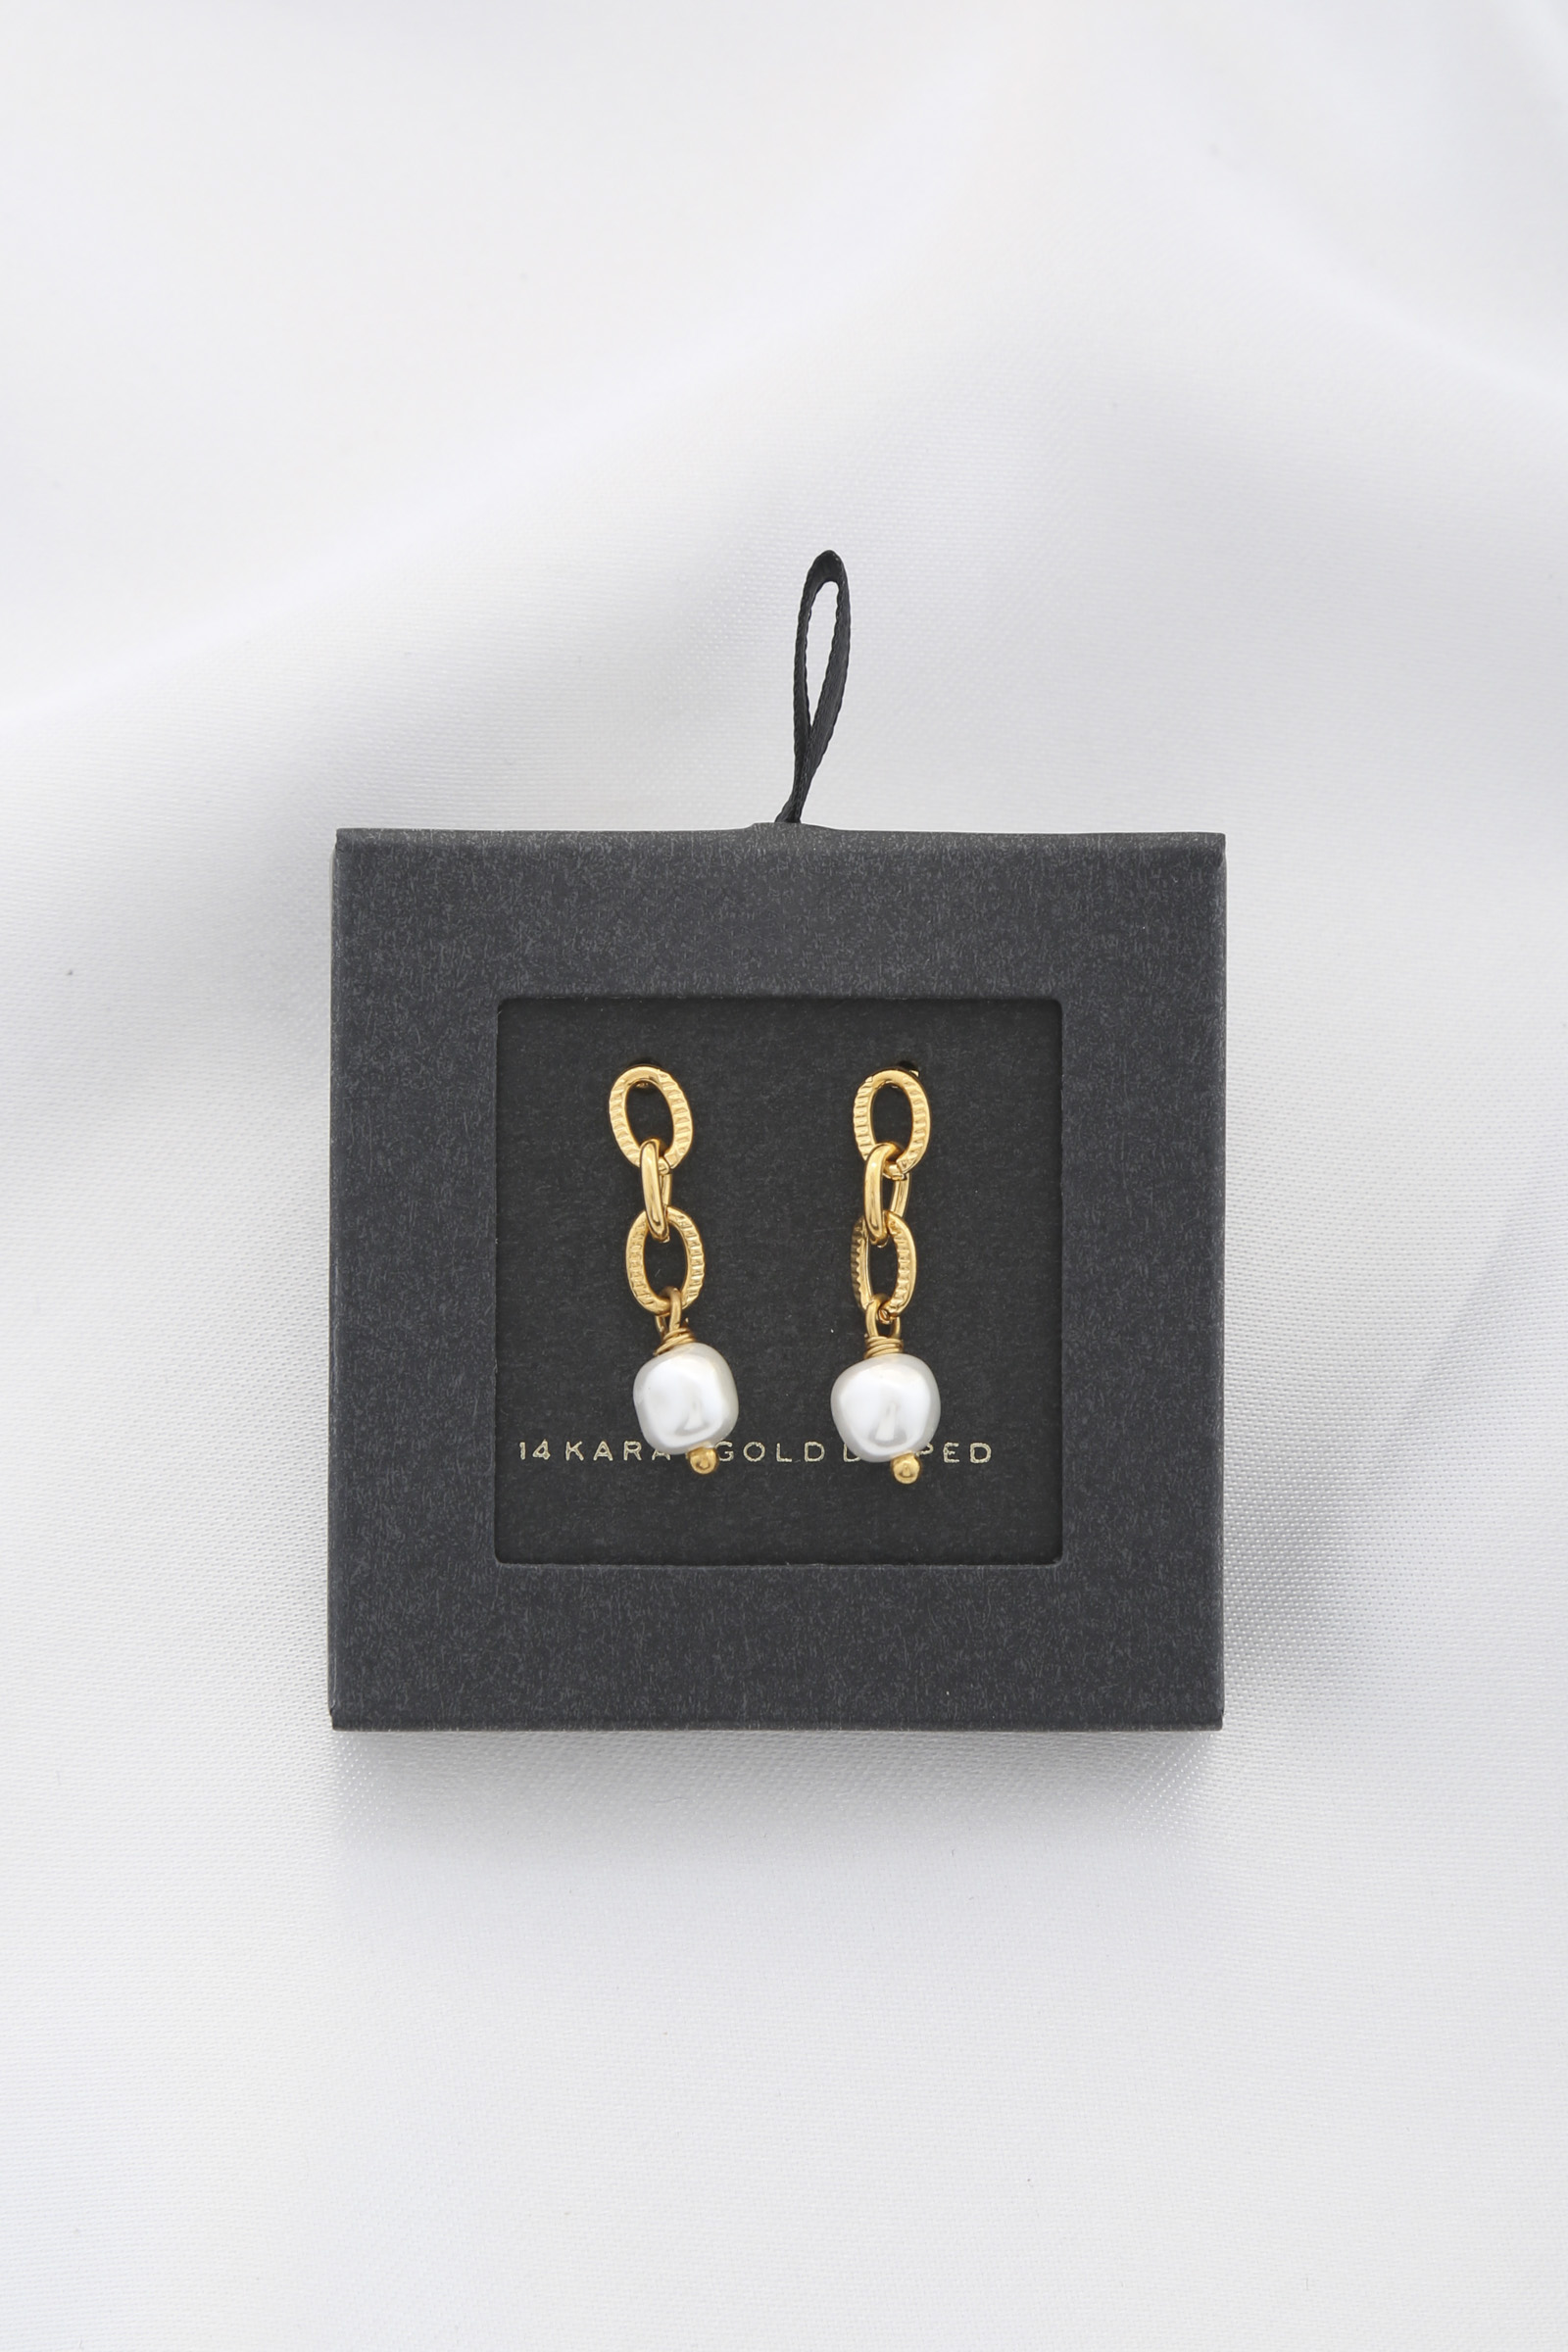 OVAL LINK PEARL BEAD 14K GOLD DIPPED EARRING